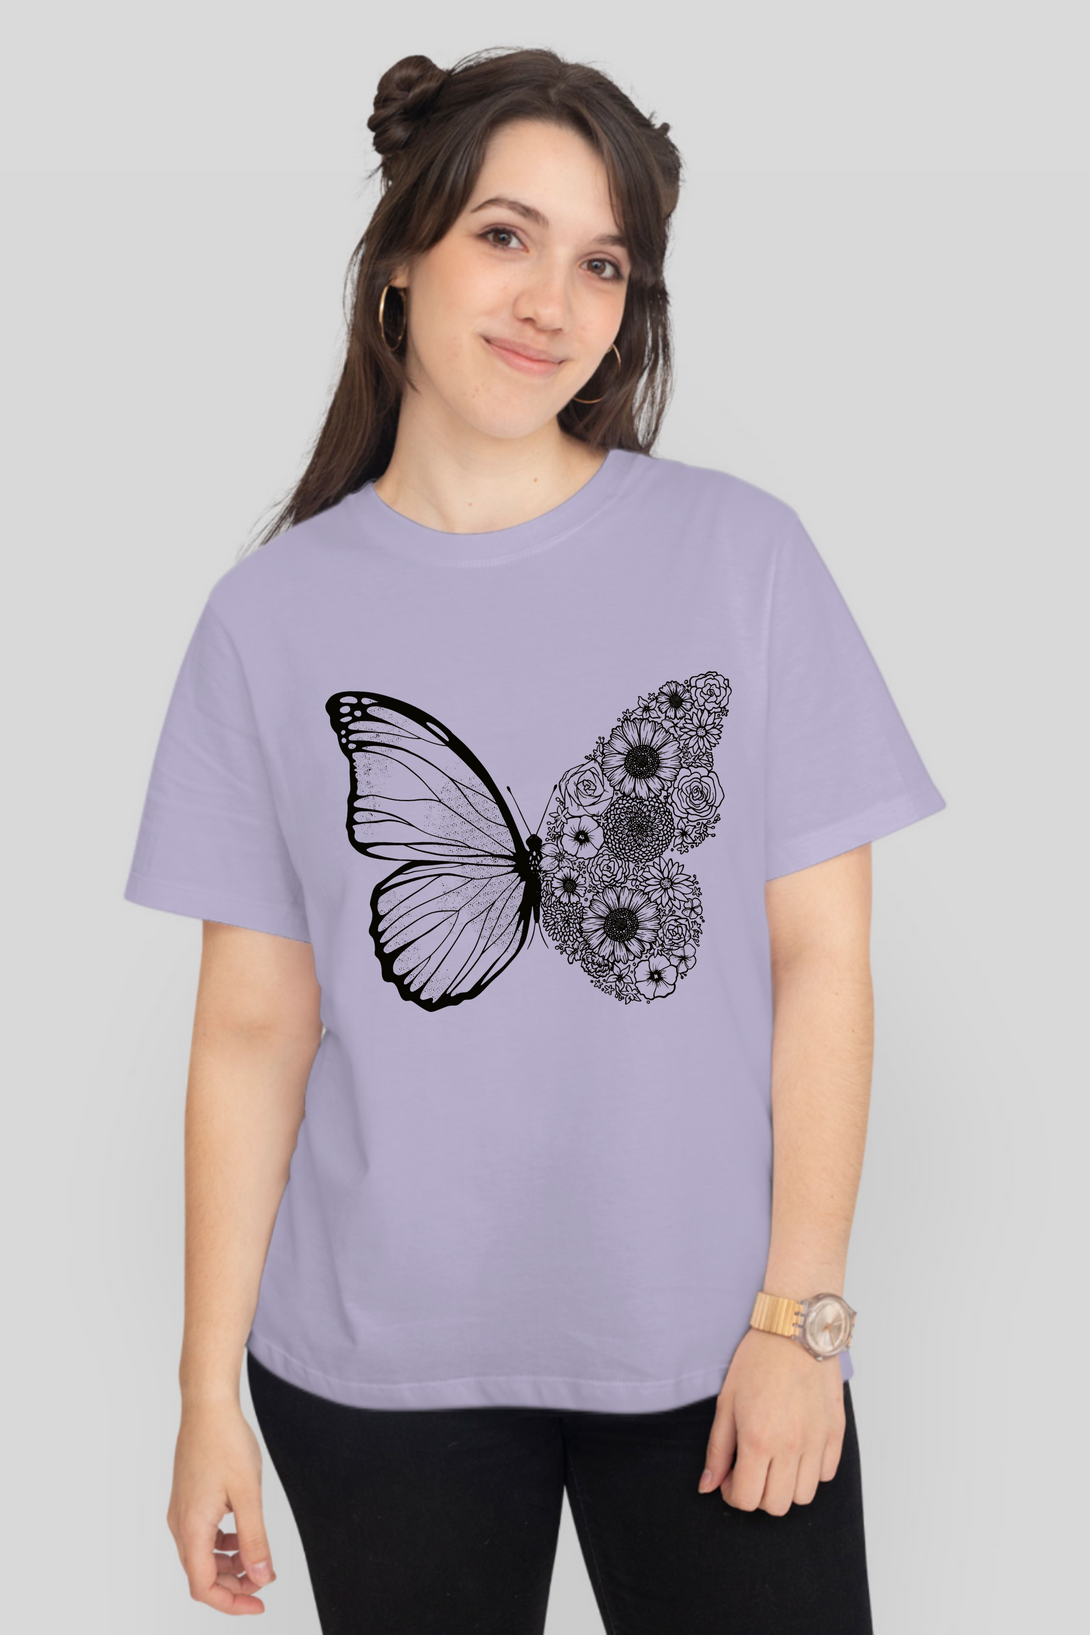 Floral Butterfly Printed T-Shirt For Women - WowWaves - 9